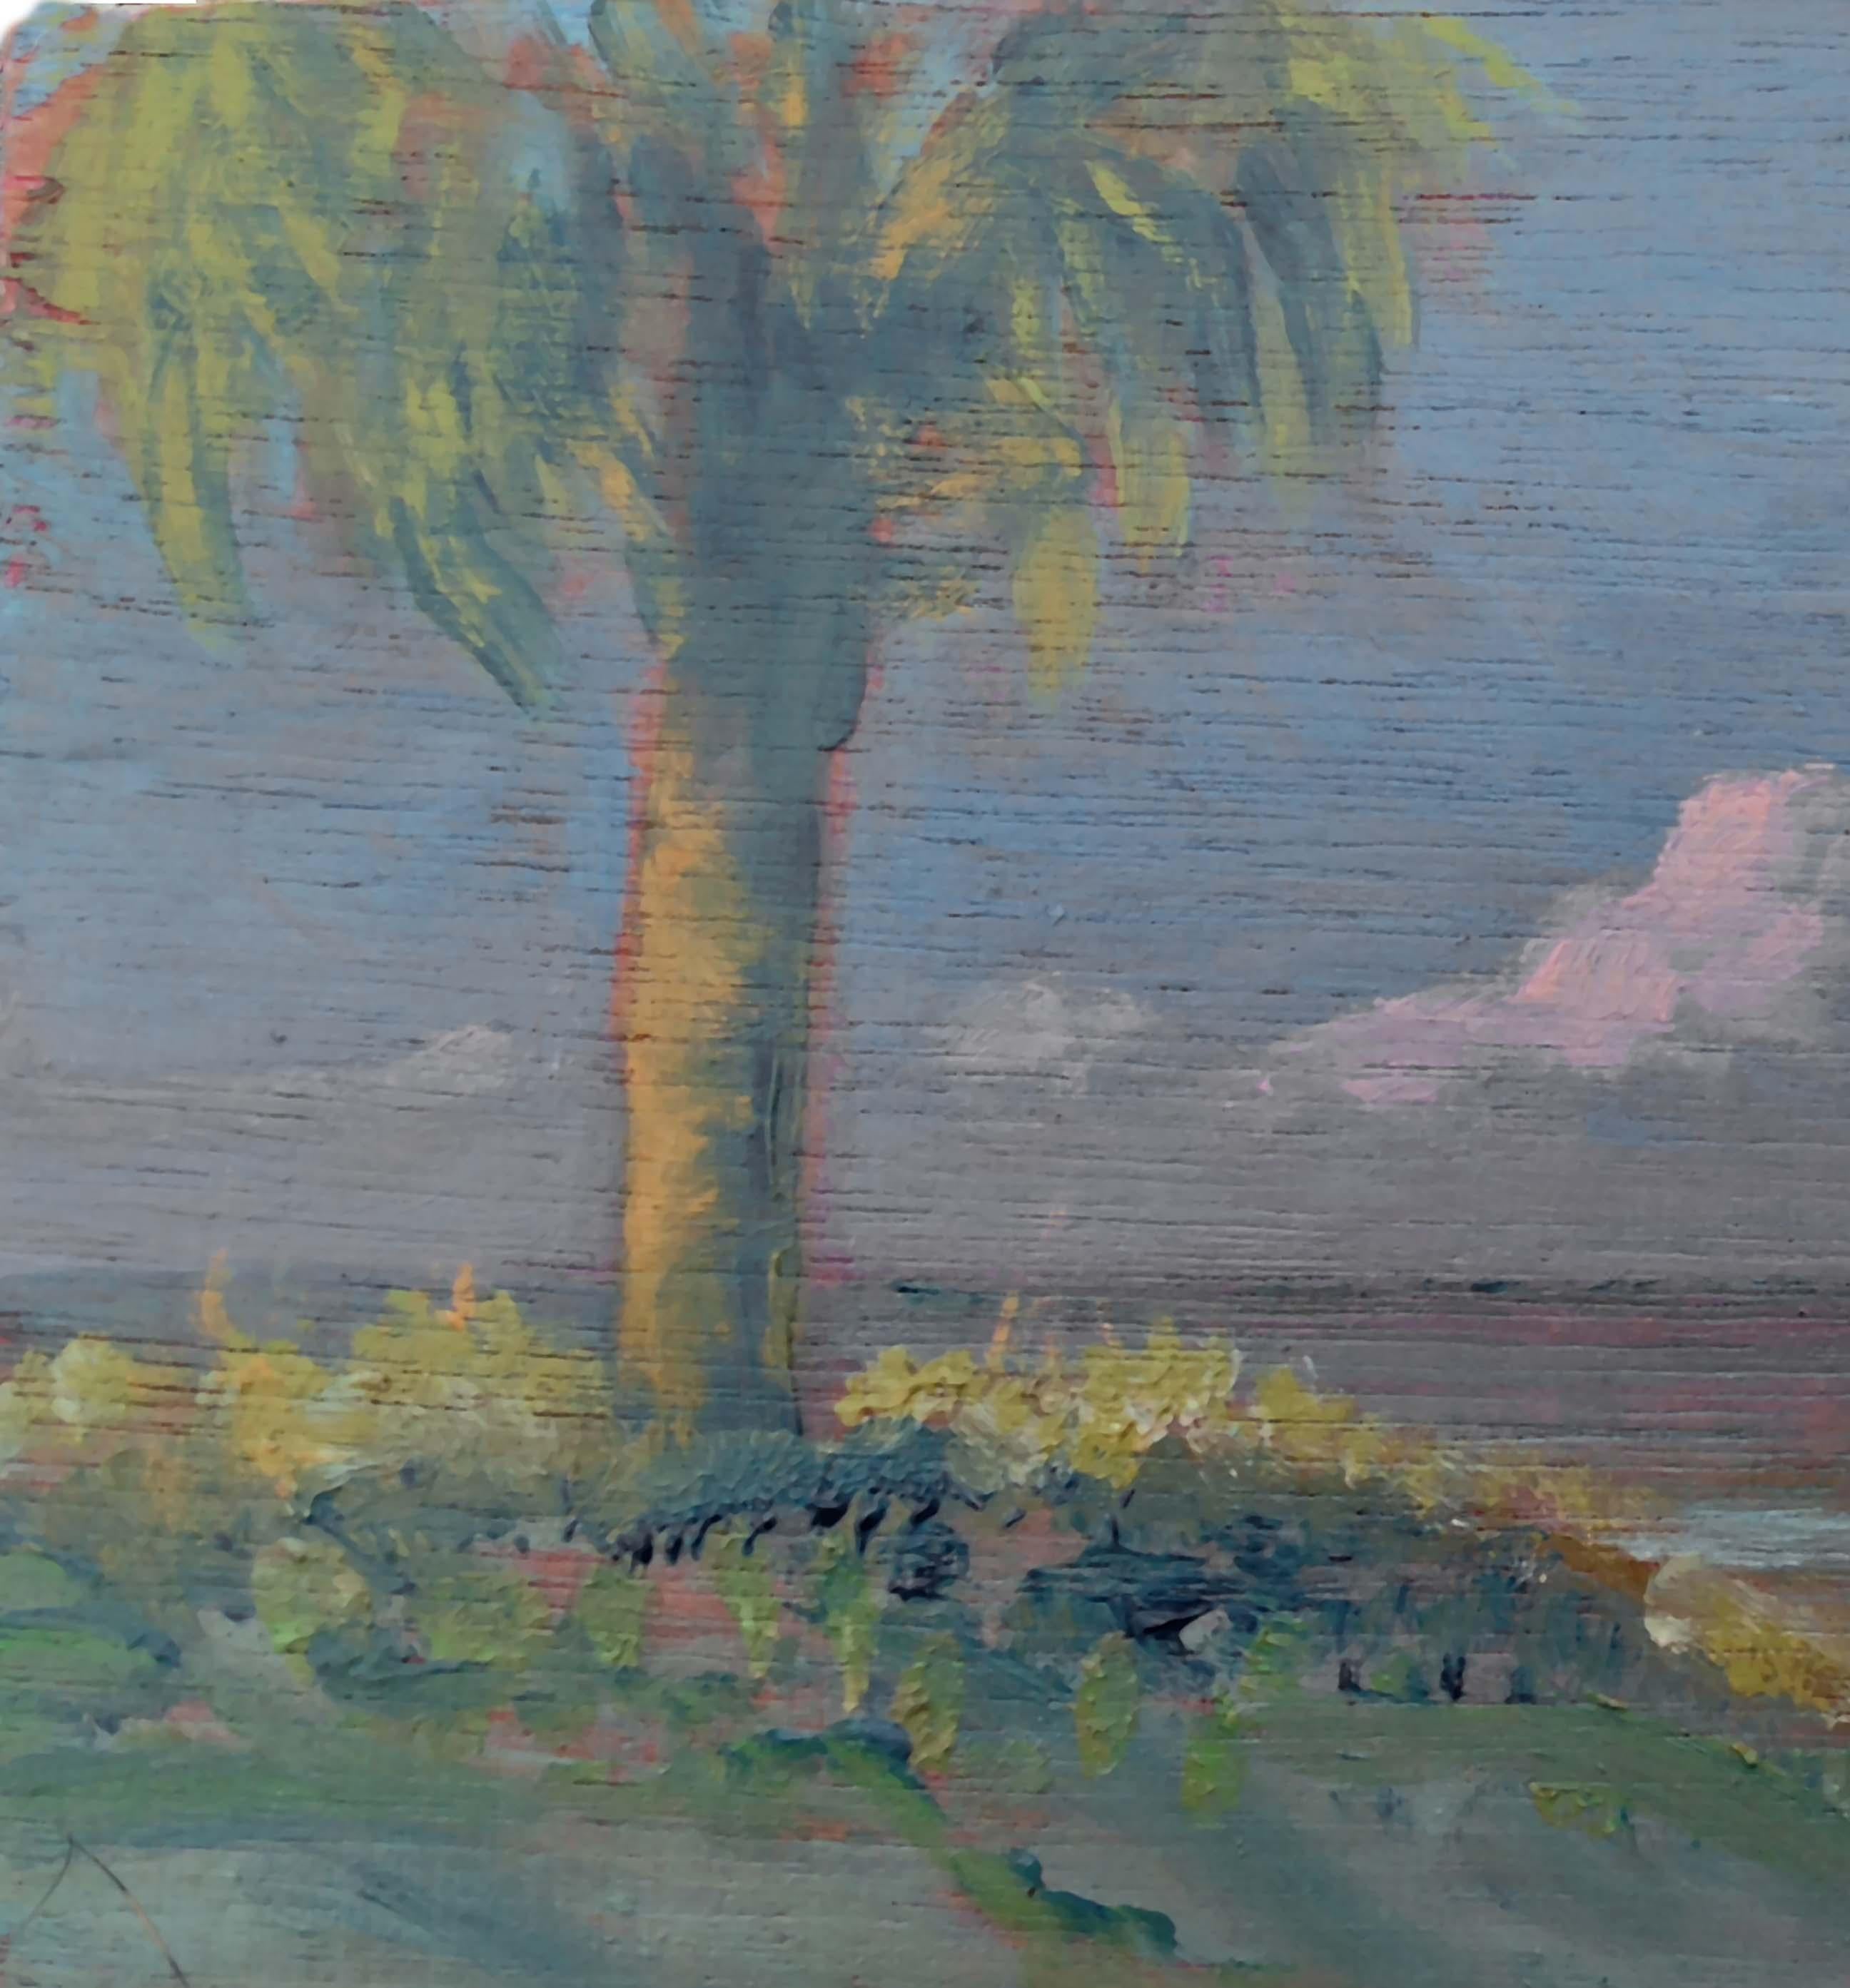 Path Through the Palms, Pensacola Florida Small-Scale Landscape  - American Impressionist Painting by Max Flandorfer